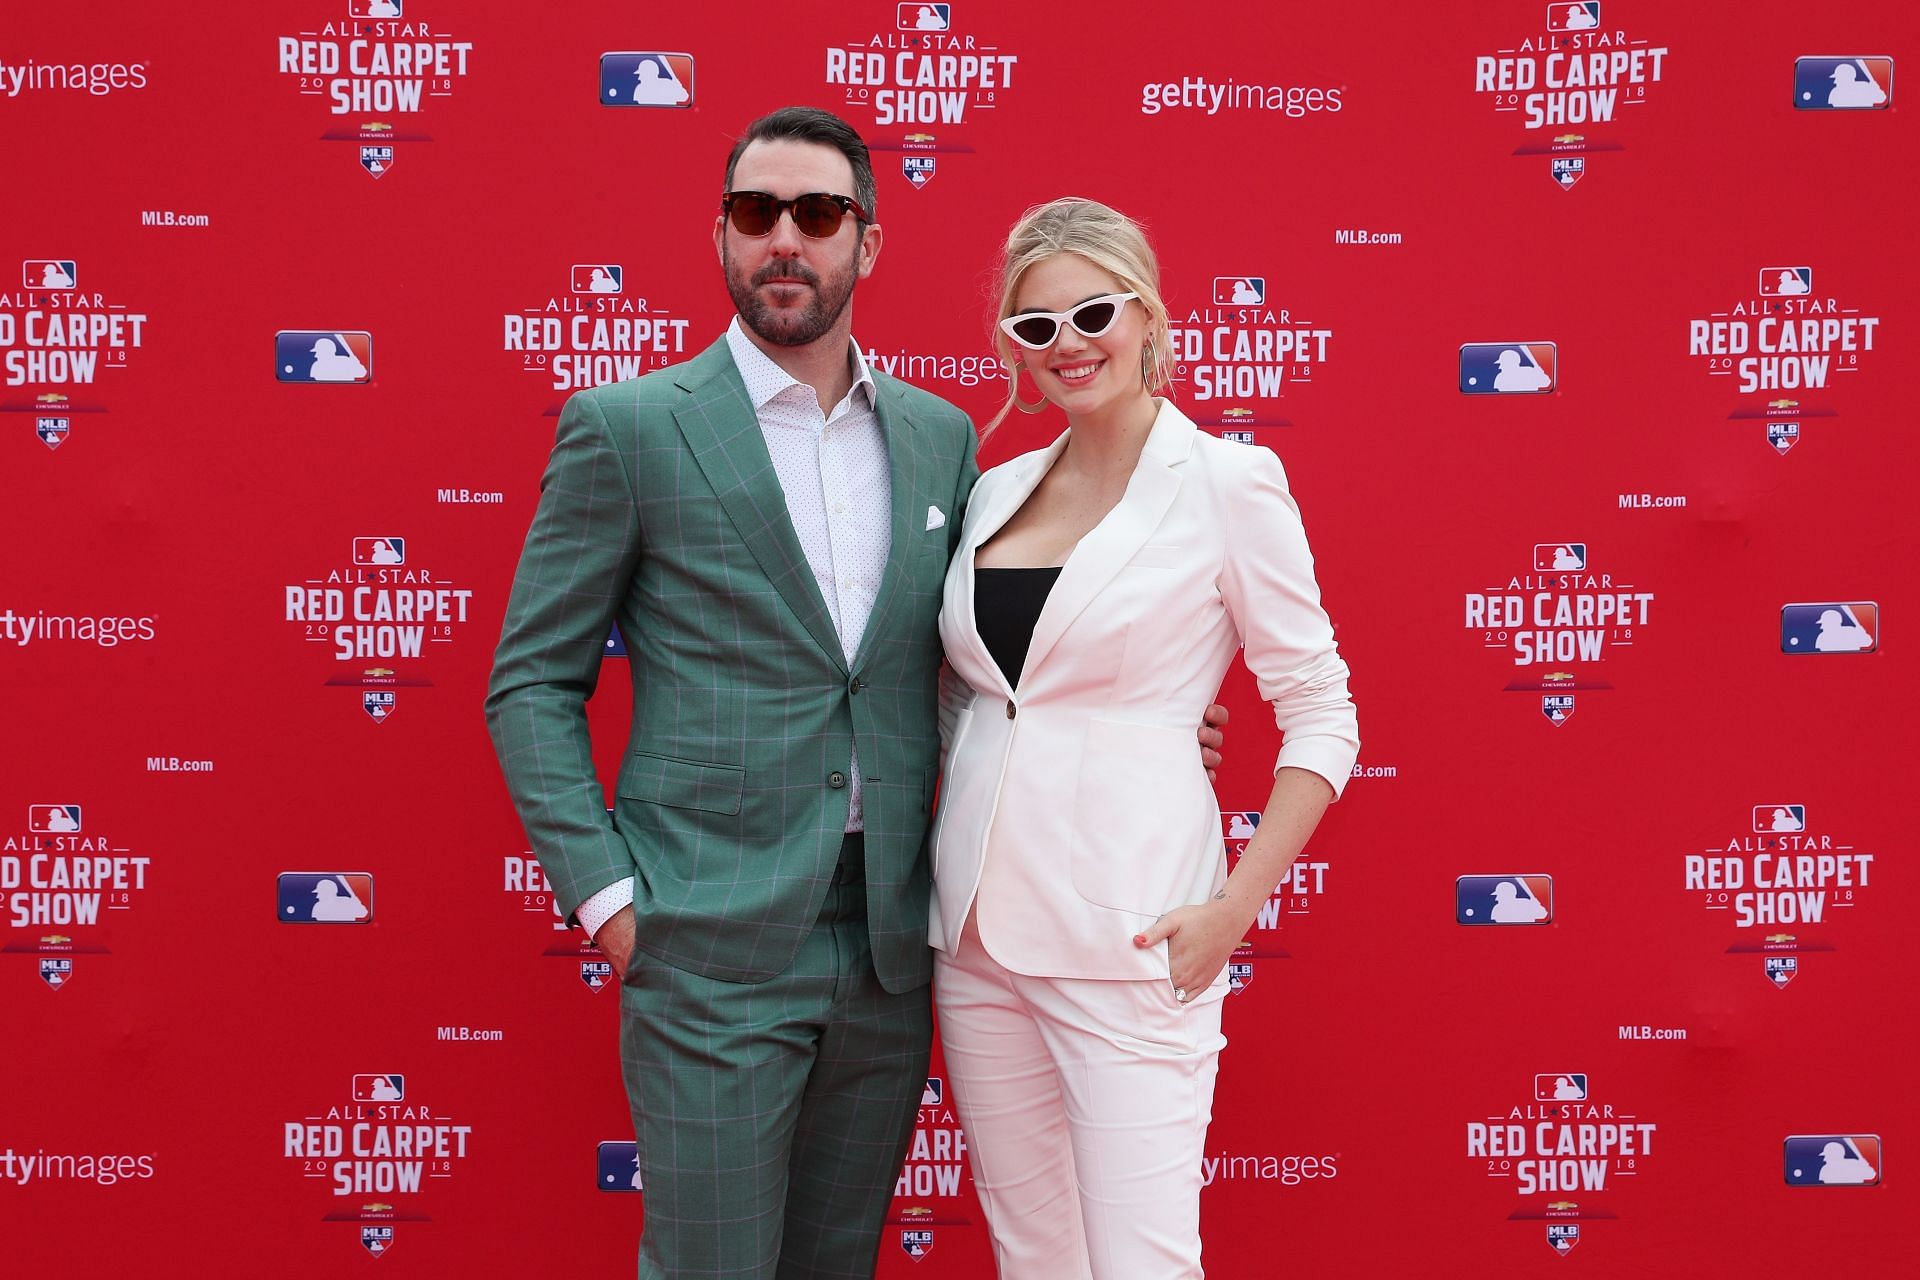 89th MLB All-Star Game, presented by MasterCard - Red Carpet: WASHINGTON, DC - JULY 17: Justin Verlander #35 of the Houston Astros and the American League and wife Kate Upton attend the 89th MLB All-Star Game, presented by MasterCard red carpet at Nationals Park on July 17, 2018, in Washington, DC. (Photo by Patrick Smith/Getty Images)